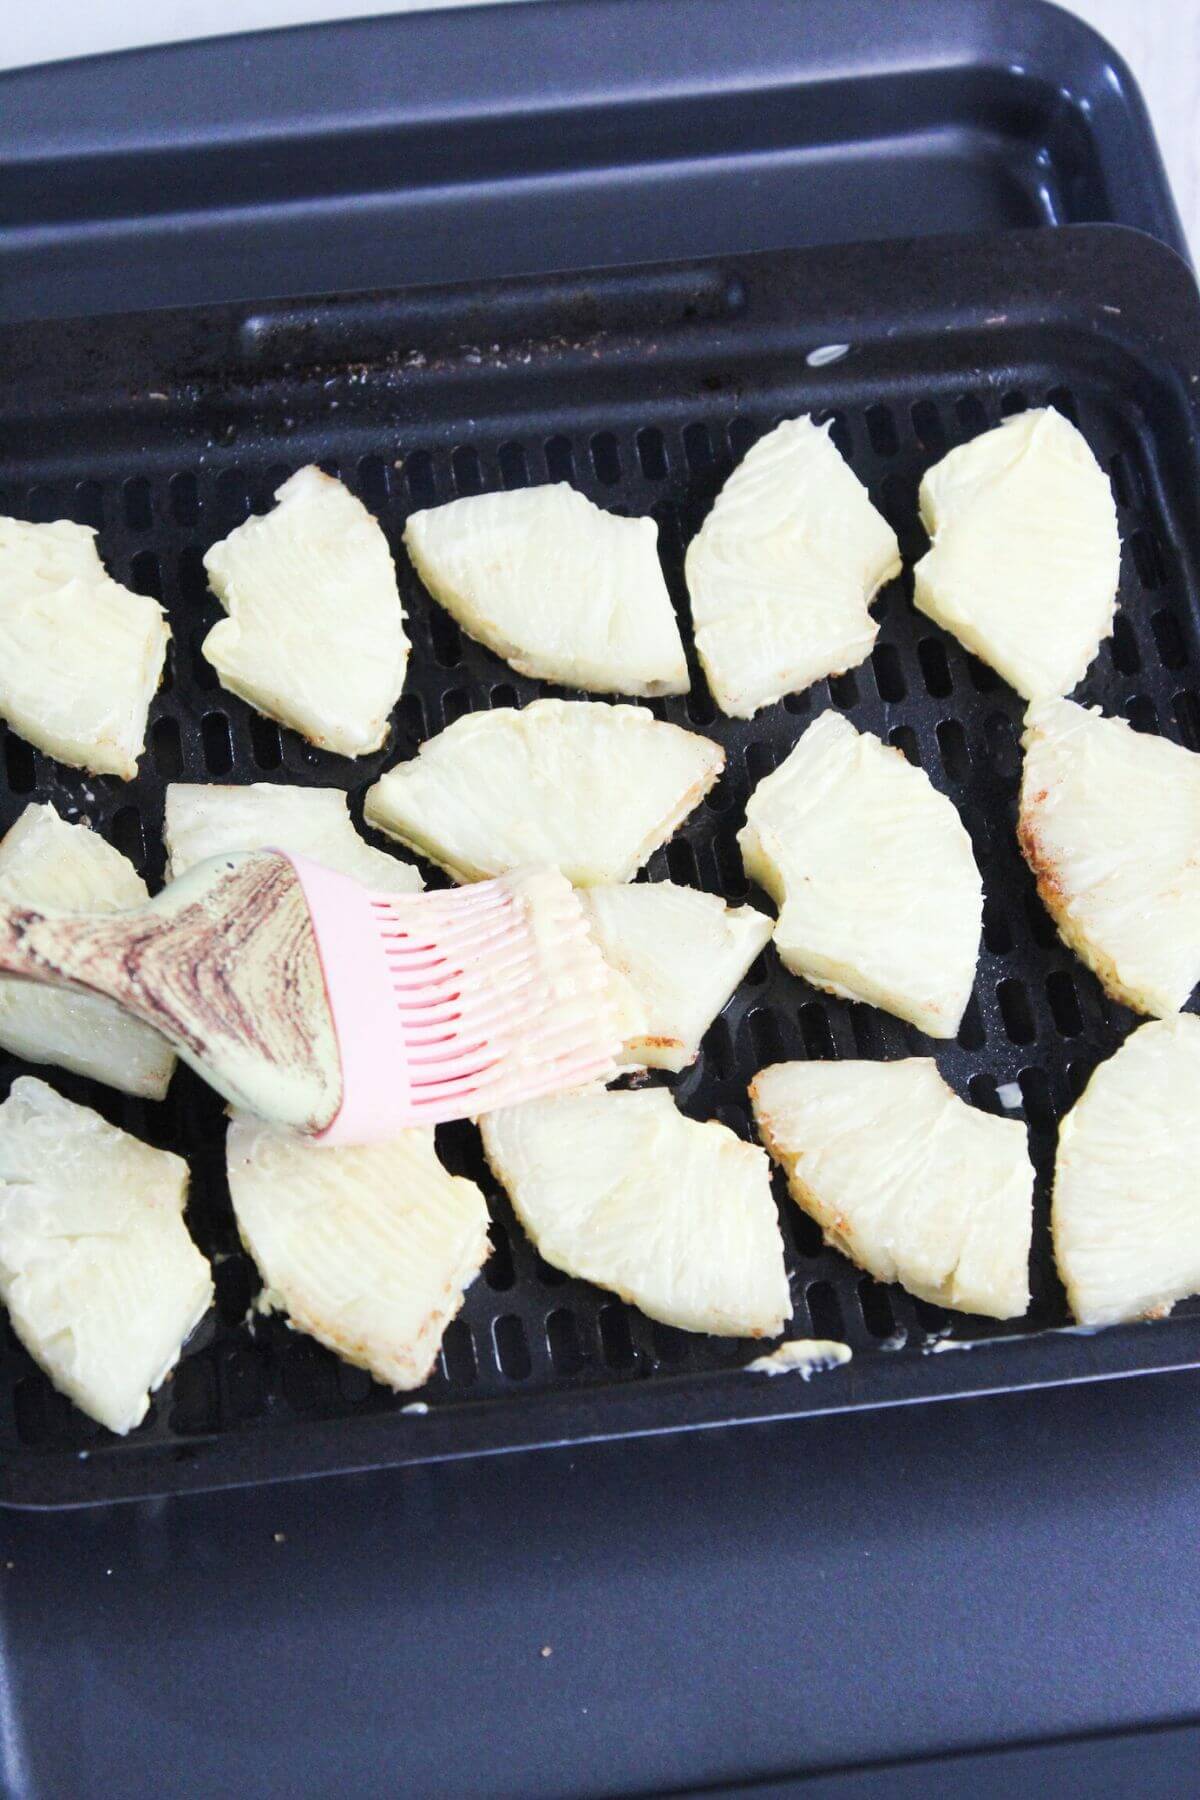 Sliced pineapple on an air fryer tray being brushed with butter.